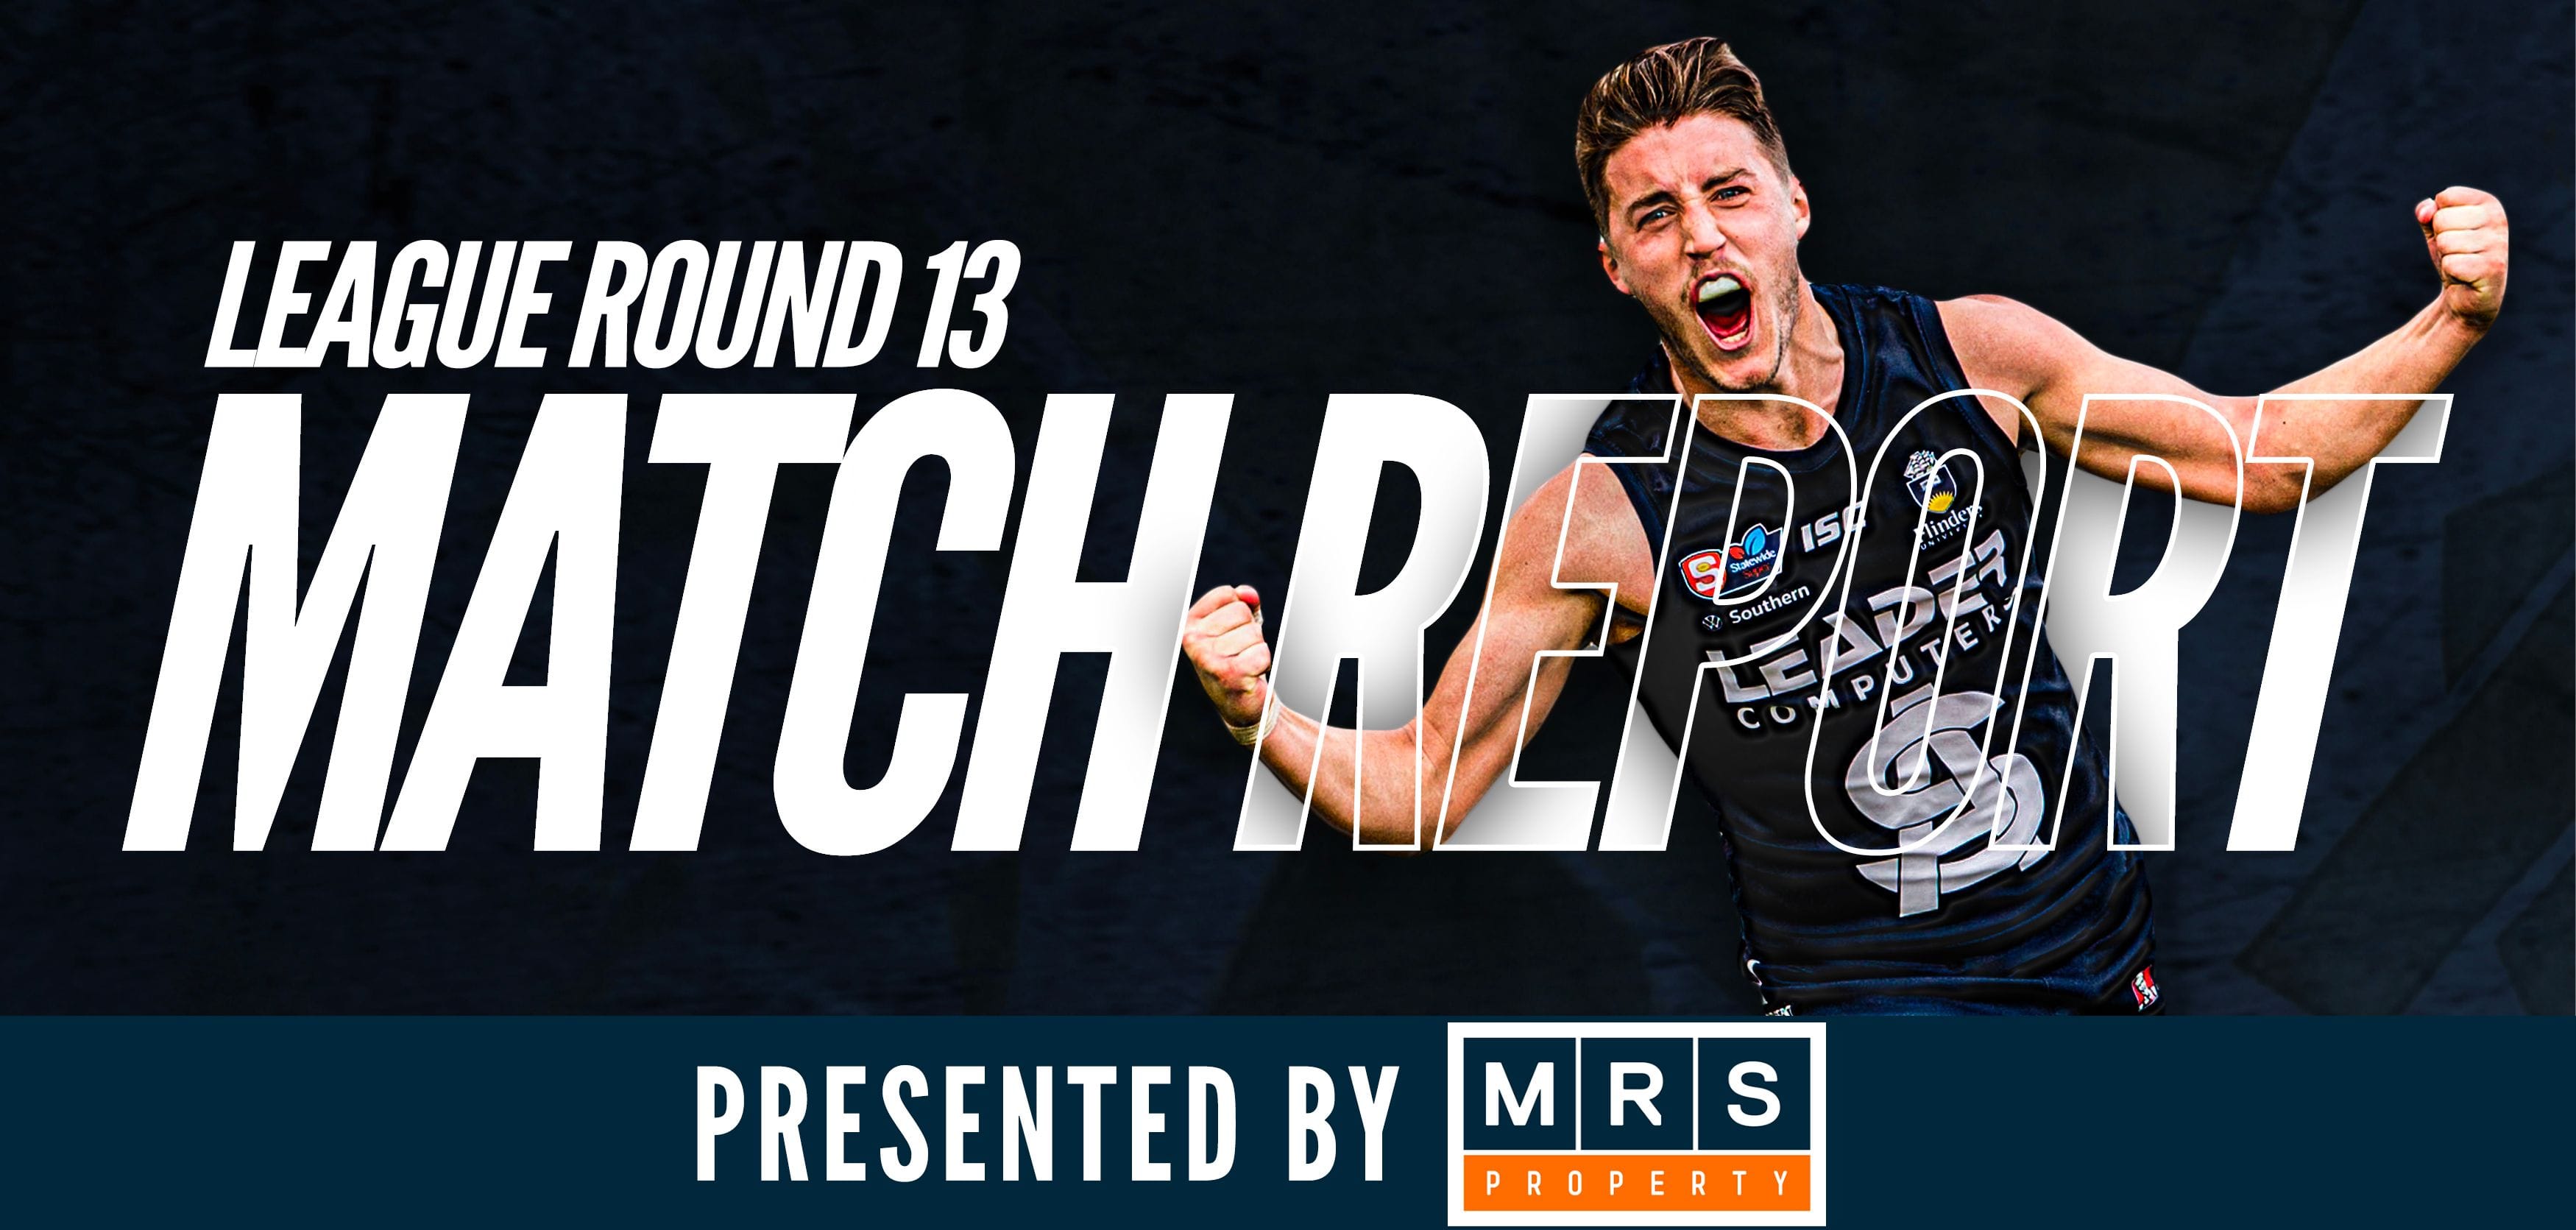 MRS Property League Match Report Round 13: South vs Norwood